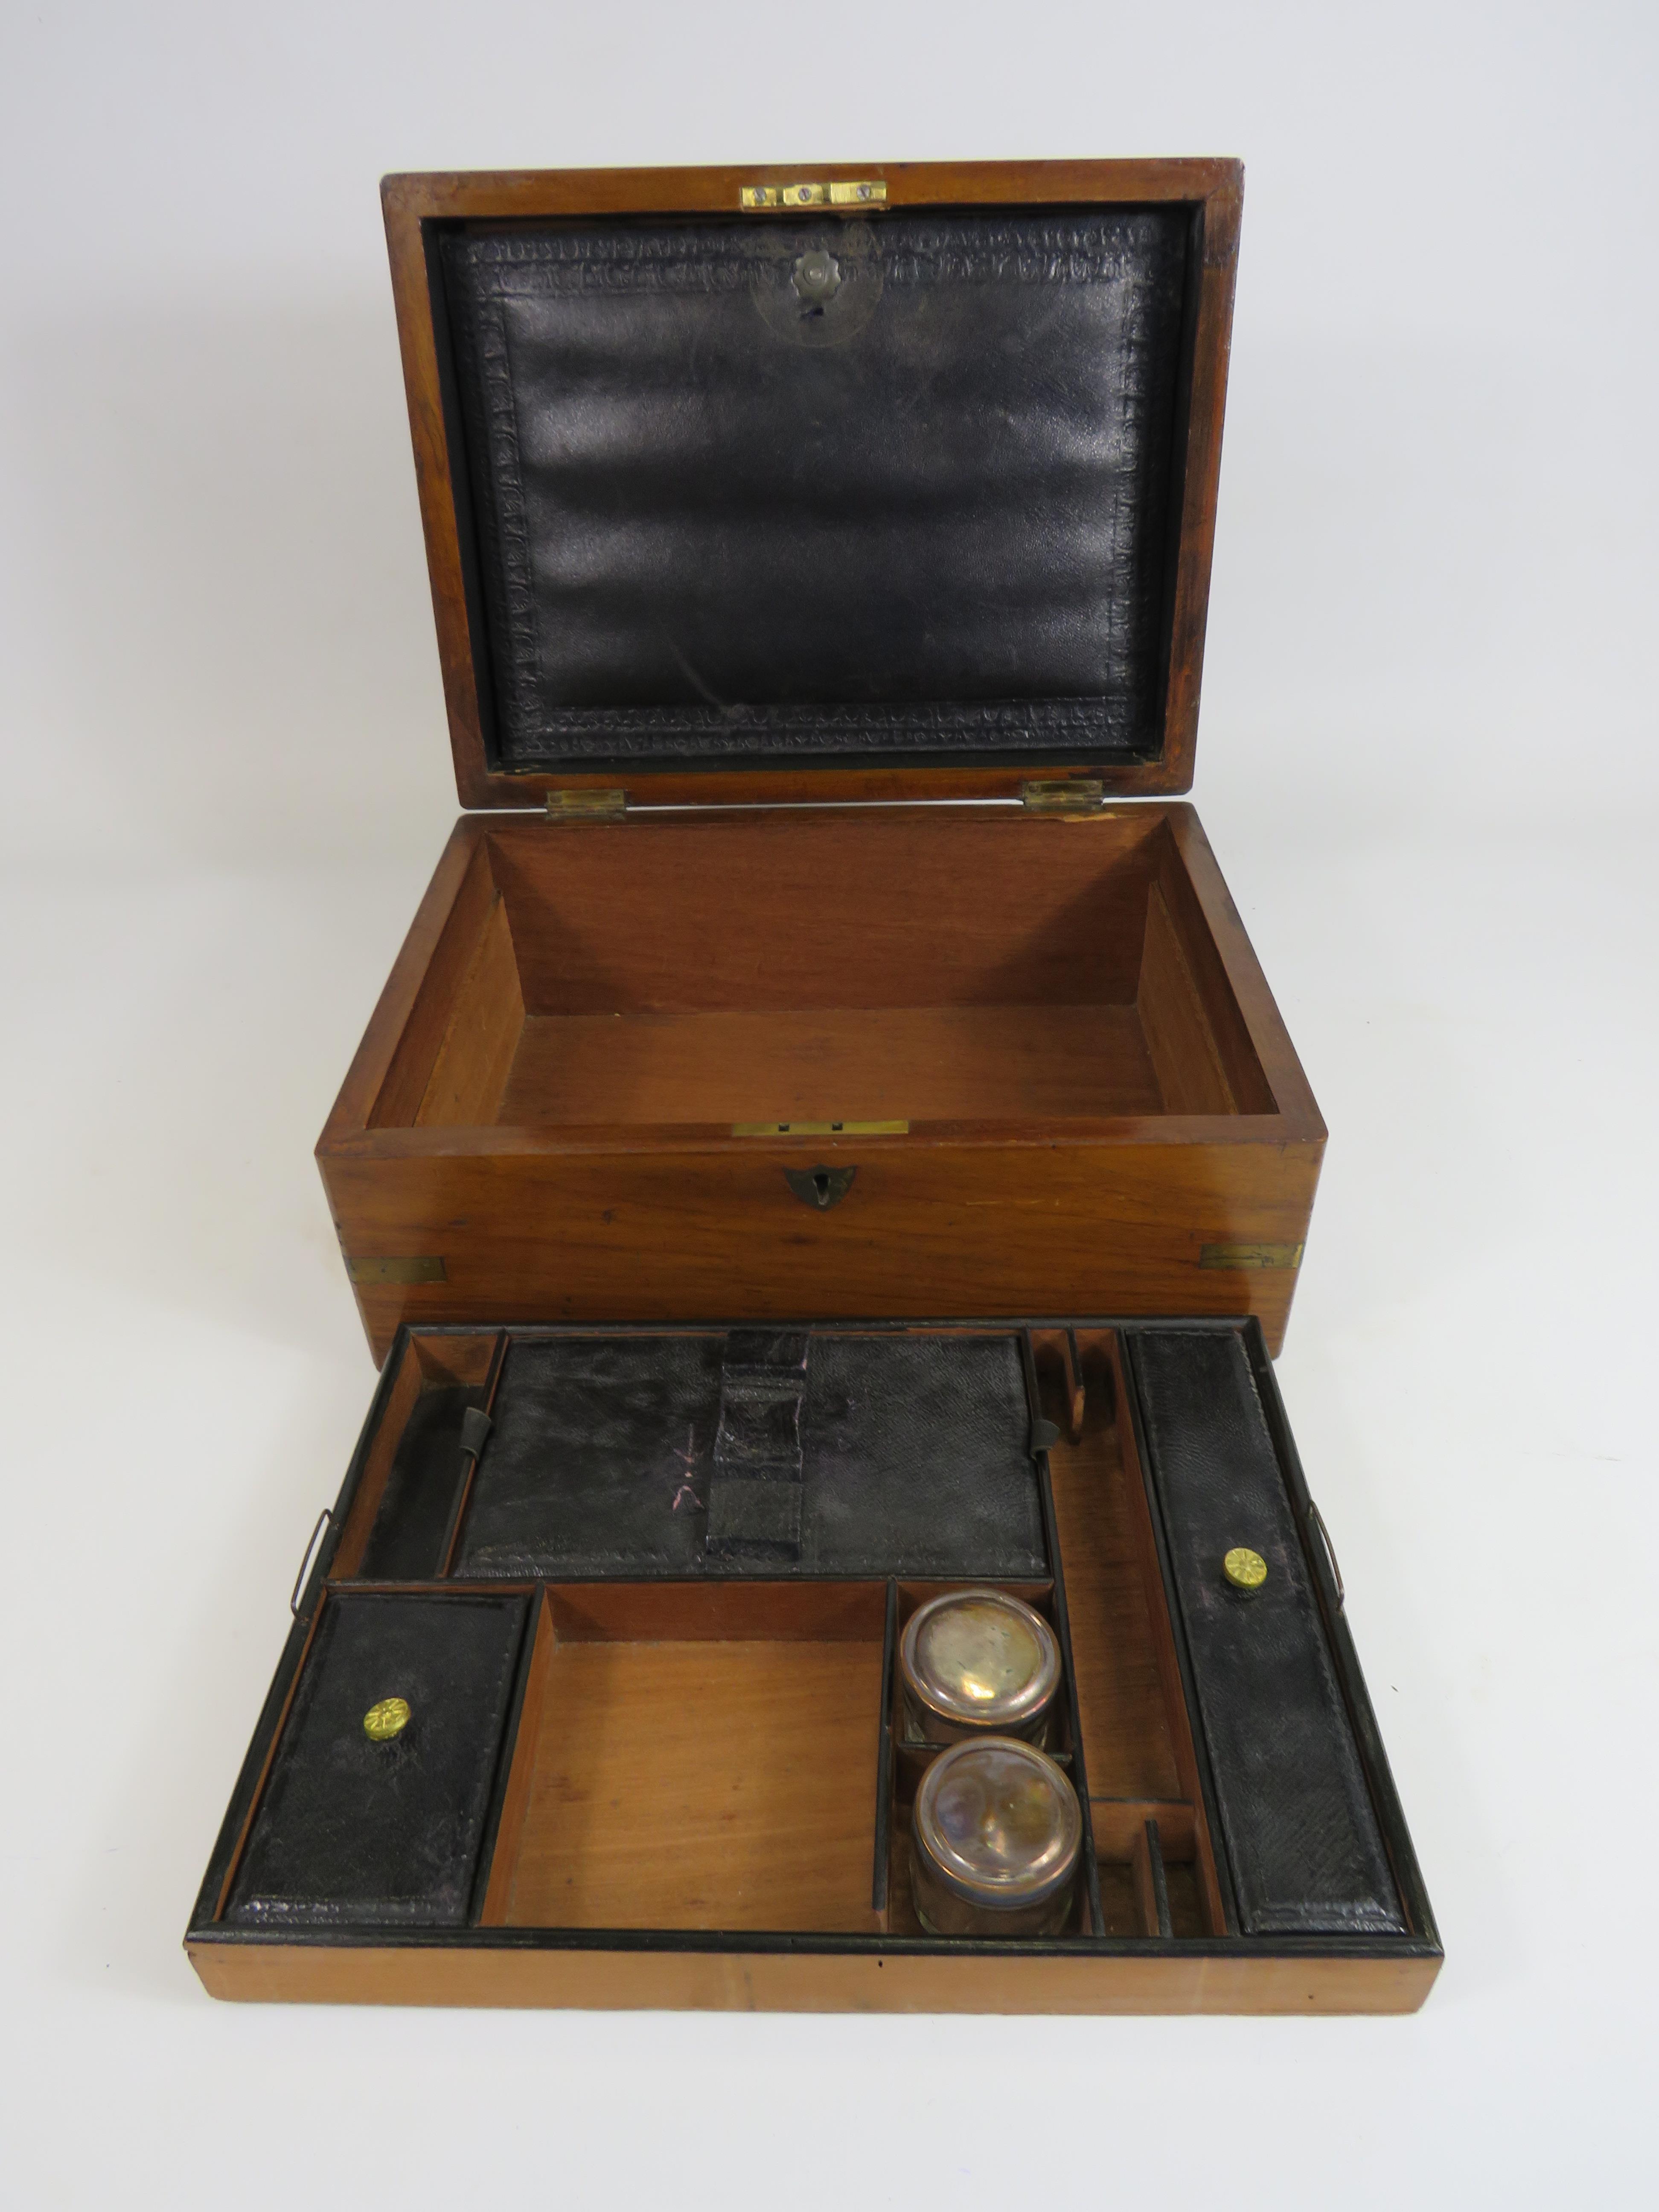 Vintage rosewood ladies vanity box with brass inlay 12" long, 9" deep and 5.5" tall. - Image 2 of 4